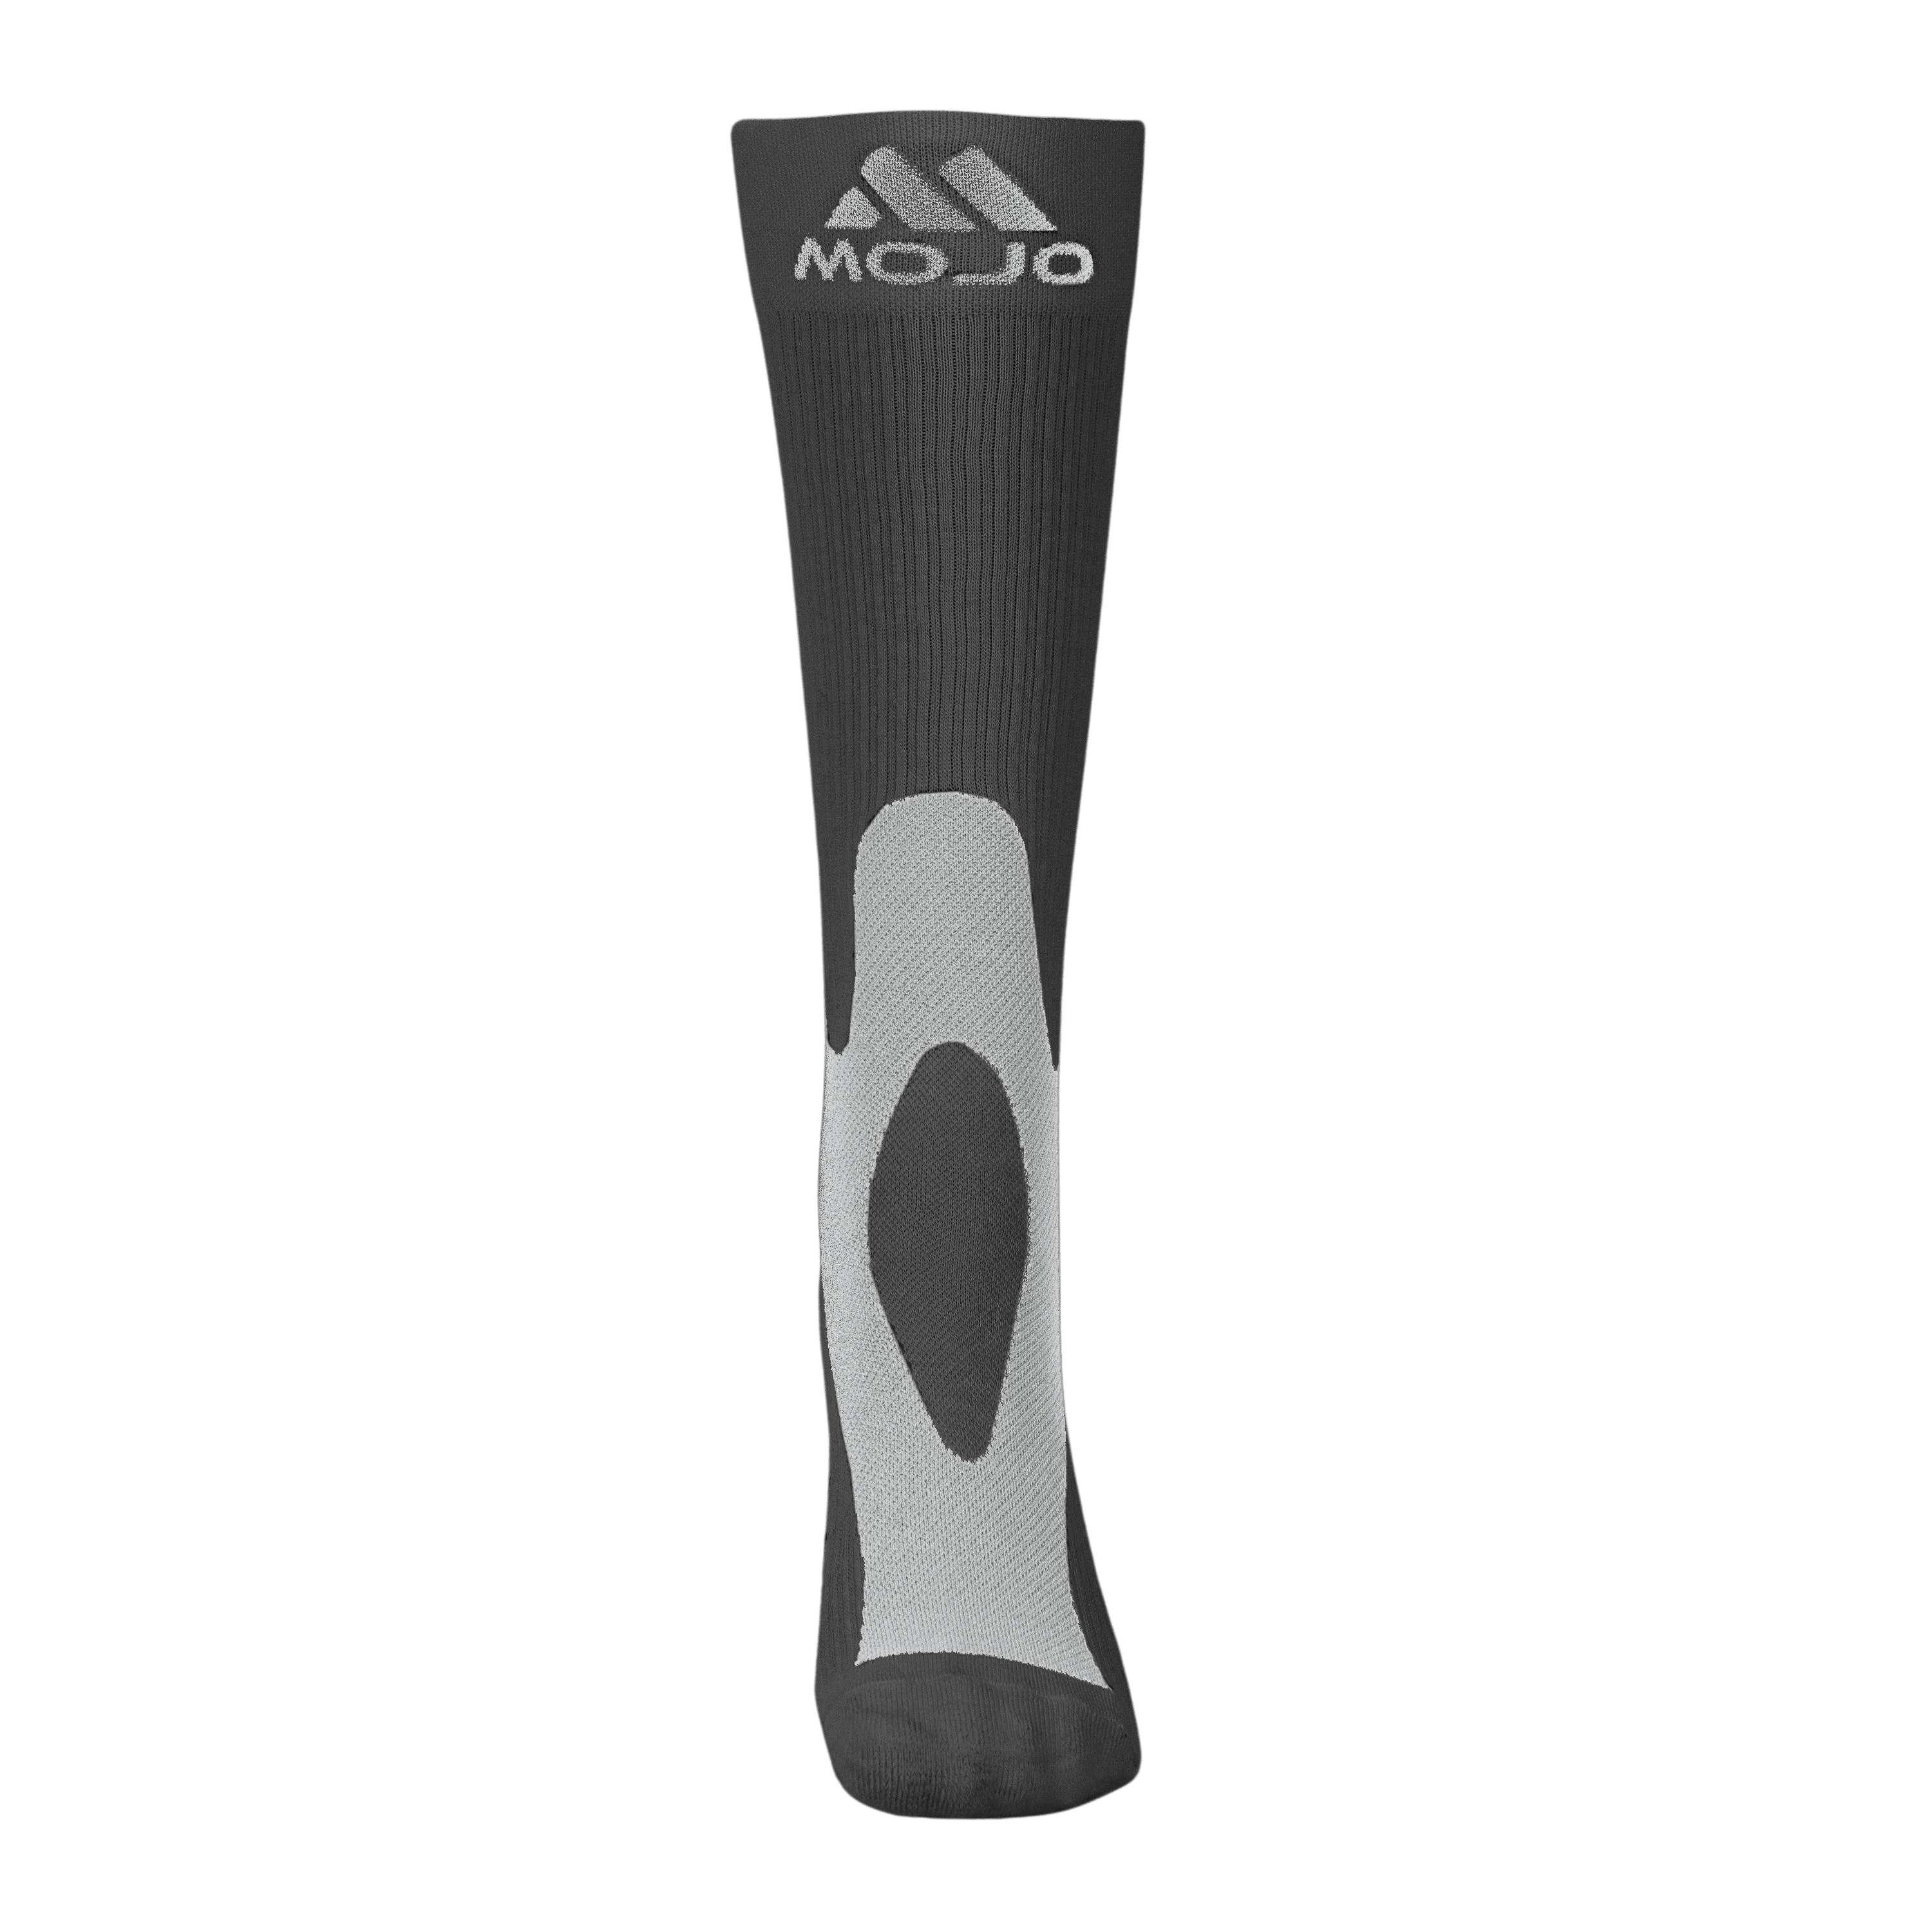 MoJo Recovery & Performance Sports Compression Socks - Firm Compression (20-30mmHg)(A602)